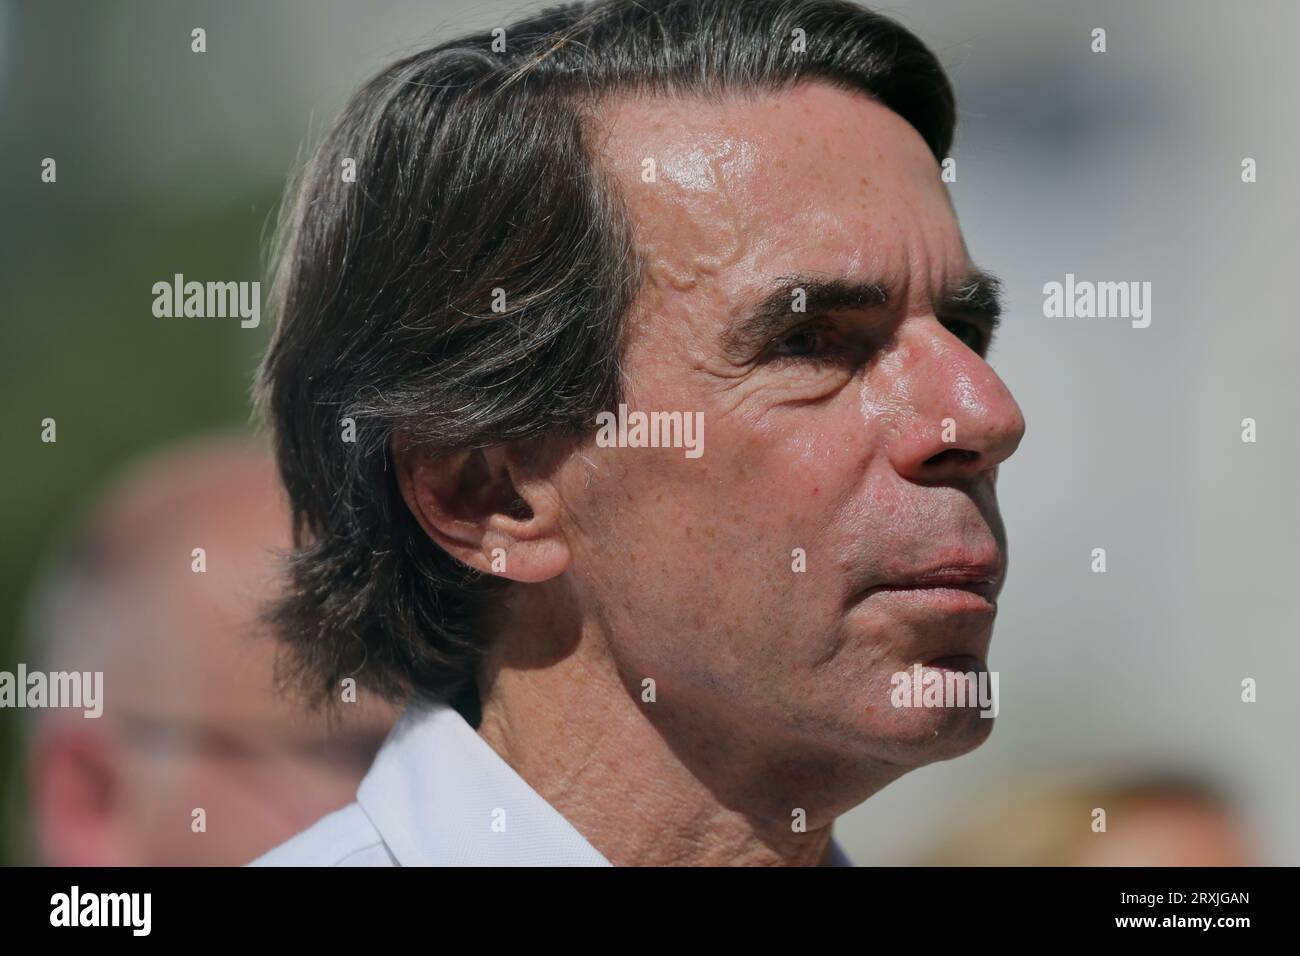 Madrid, Spain. 24th Sep, 2023. Former President Jose Maria Aznar (1994-2004) of the Popular Party attends a rally against a possible amnesty law for accused Catalan independence supporters in Madrid. Credit: Cesar Luis de Luca/dpa/Alamy Live News Stock Photo